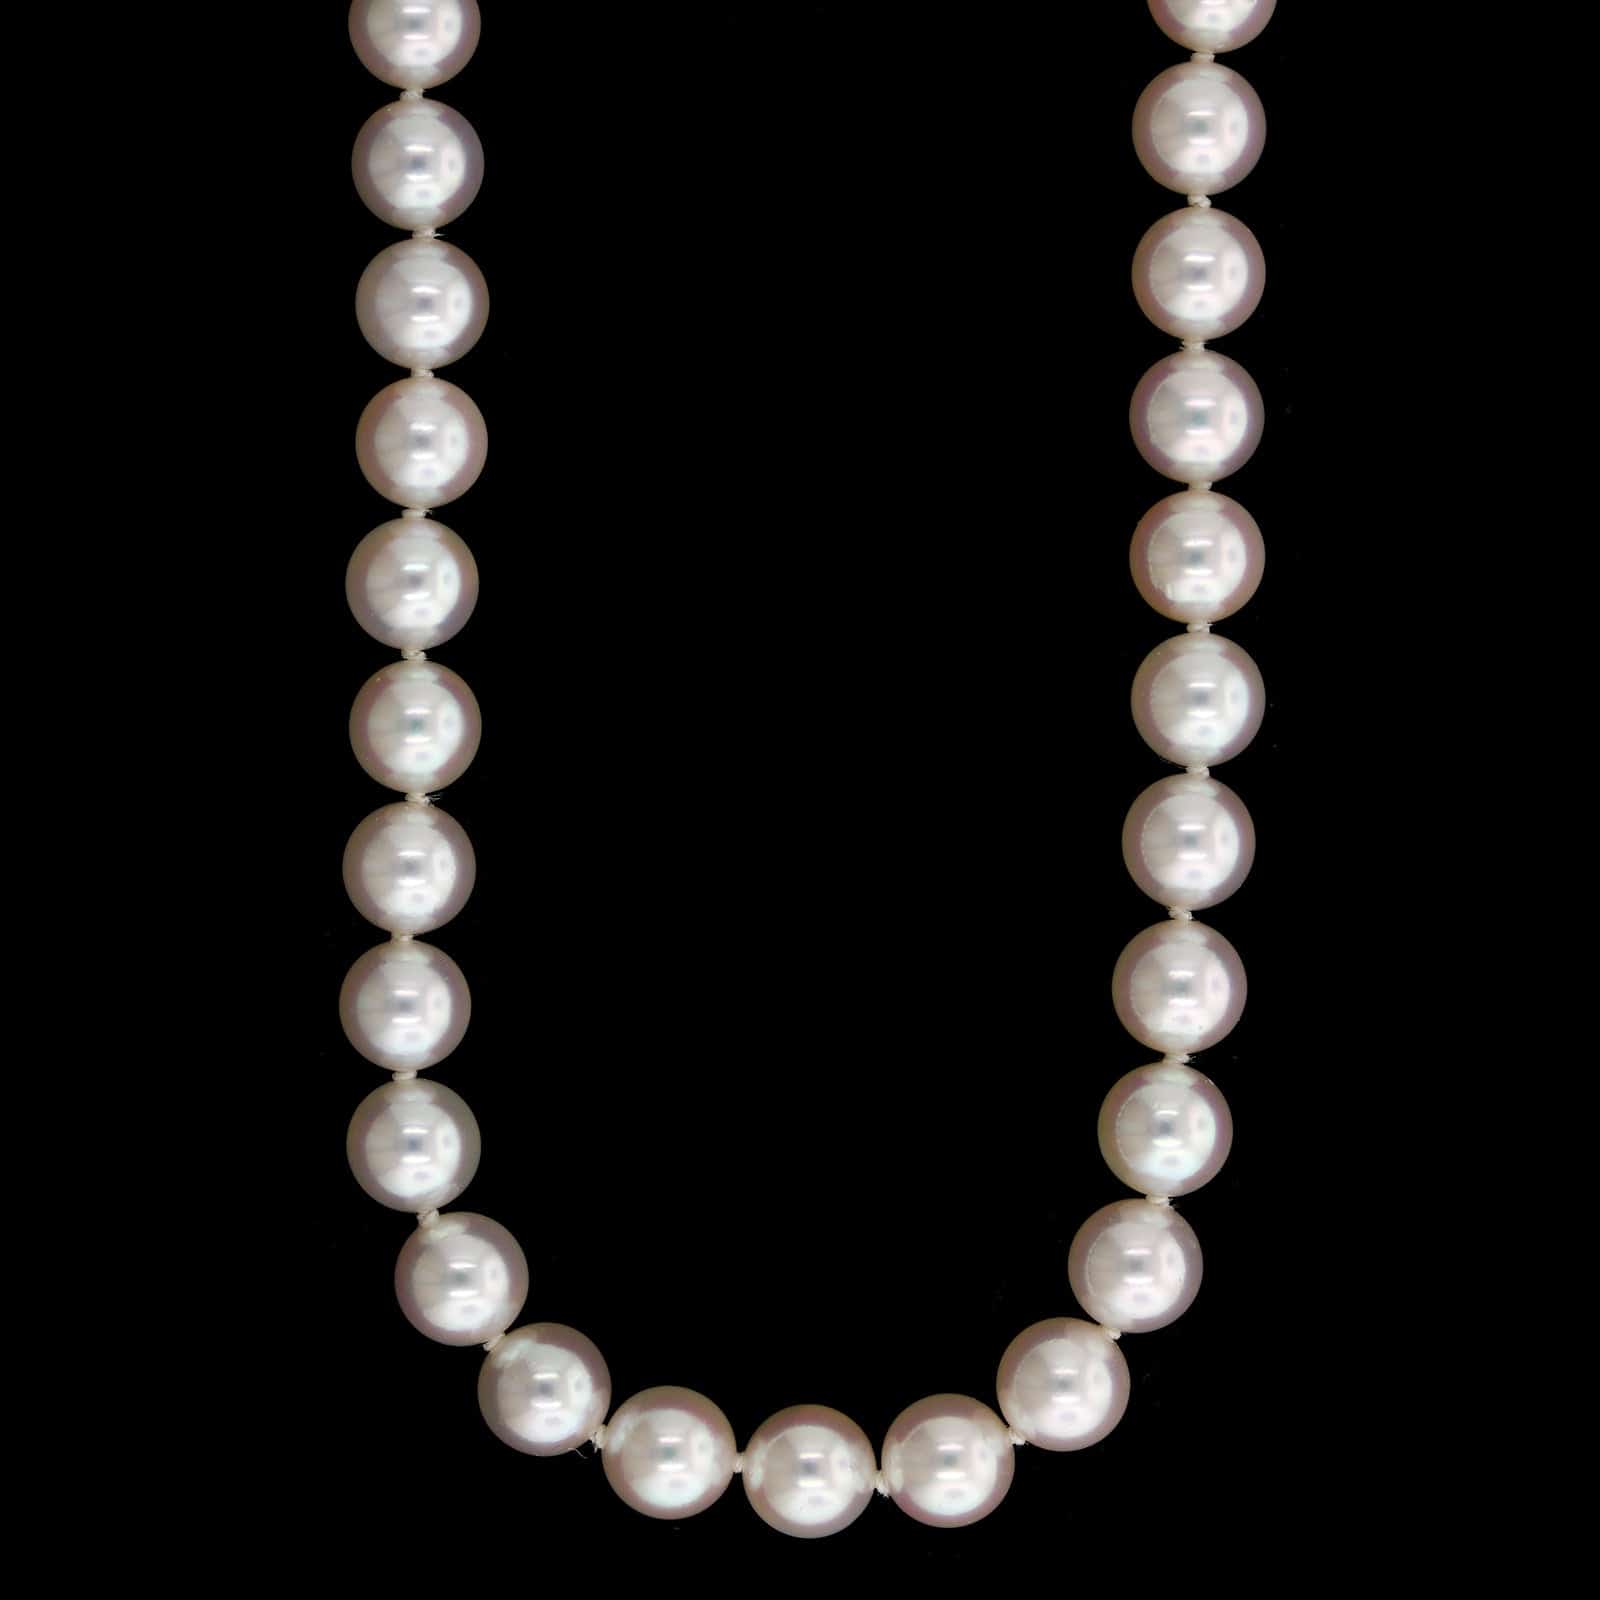 Tiffany & Co. Estate Akoya Cultured Pearl Necklace – Long's Jewelers